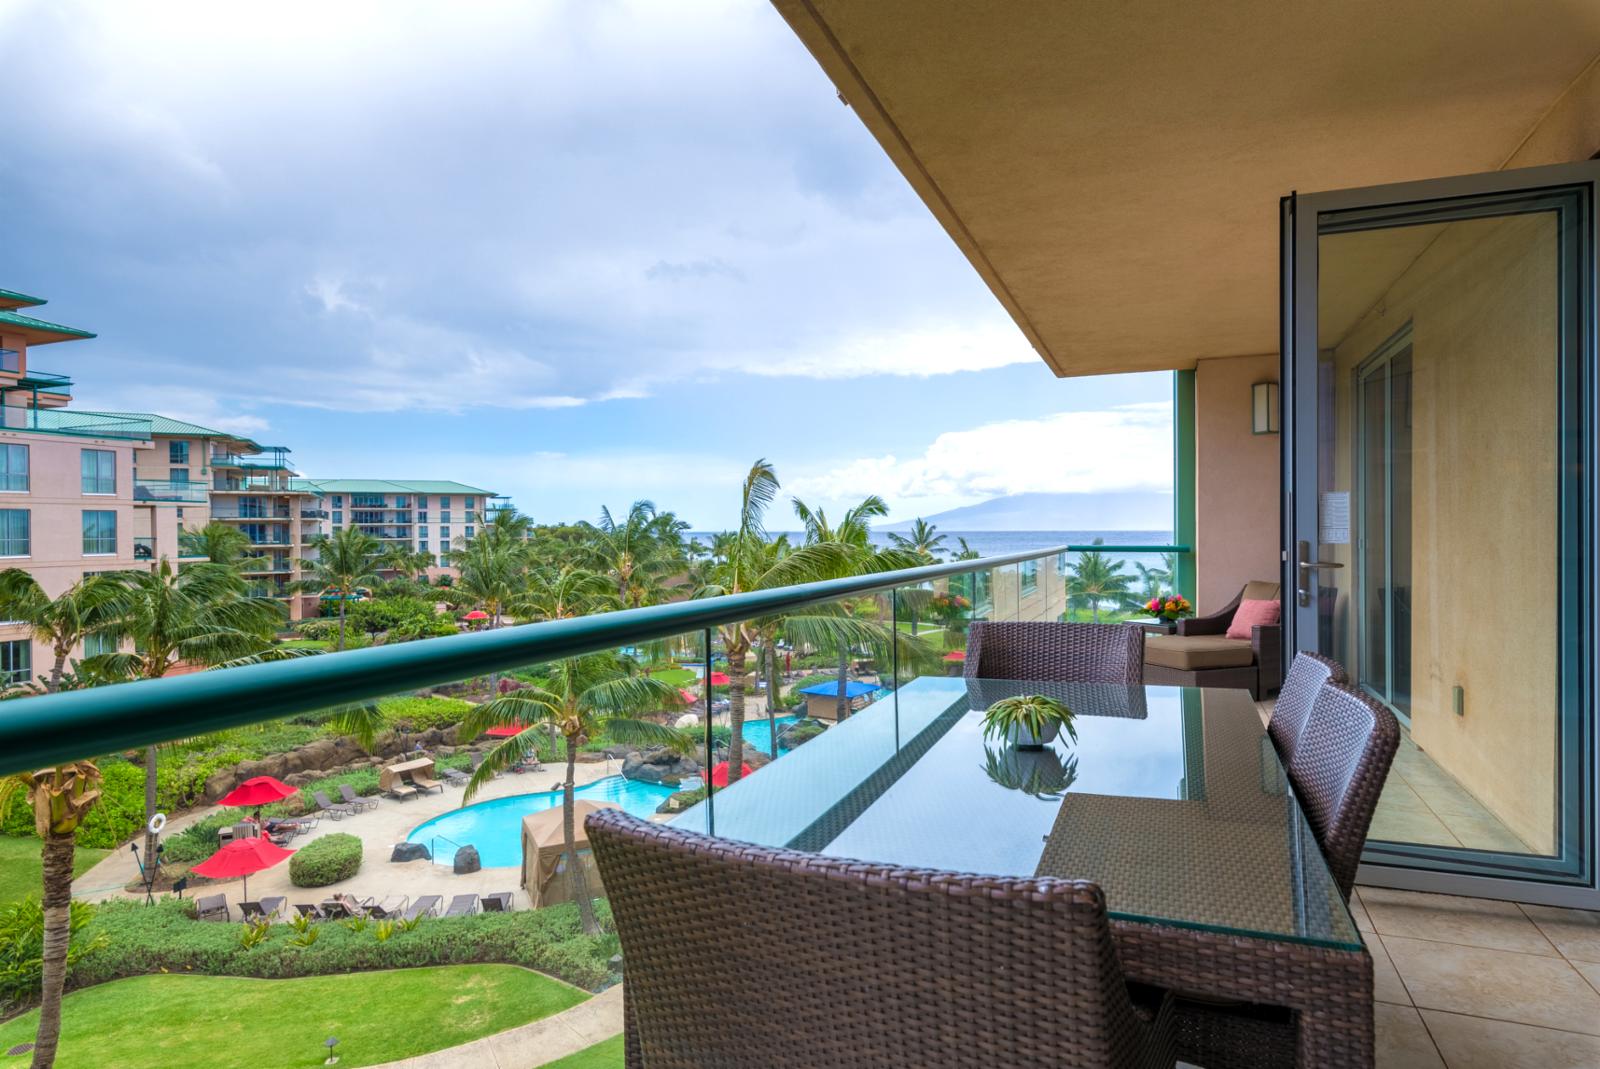 LARGE expansive balcony with ocean views!